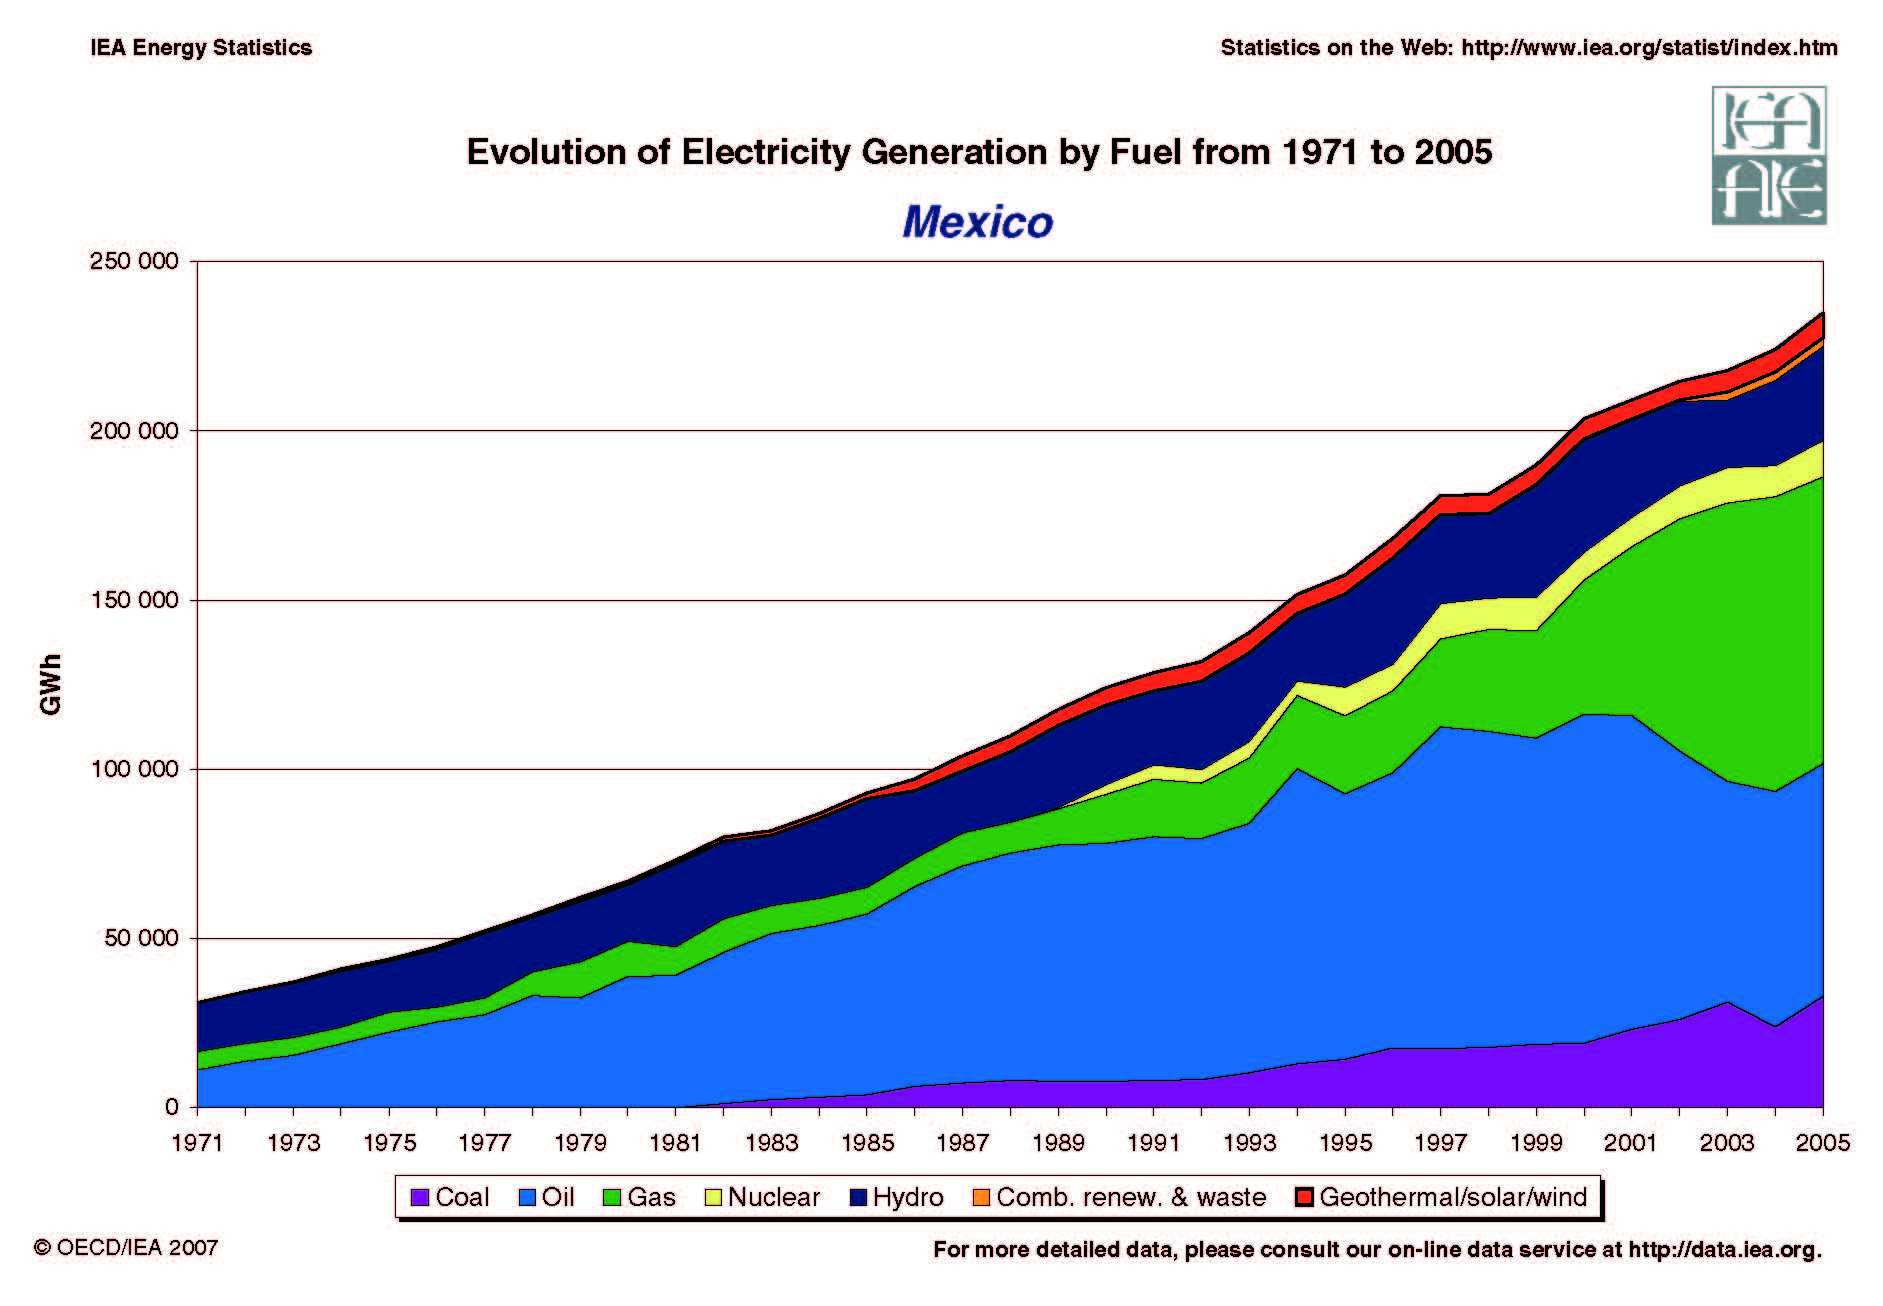 Mexico Evolution of Electricity Generation by Fuel 1971 - 2005